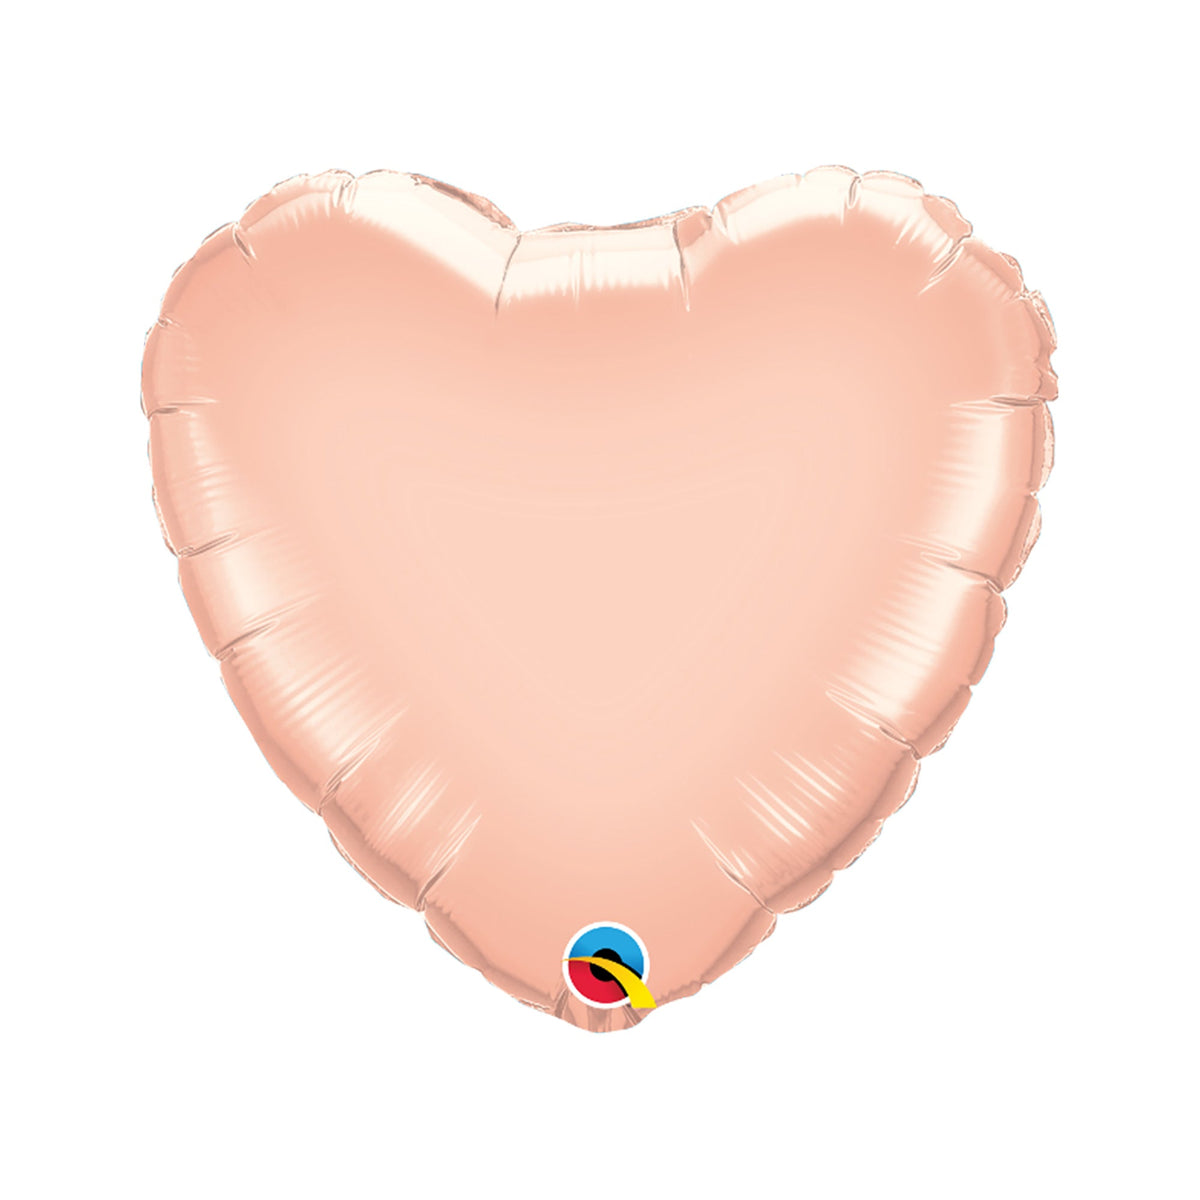 LE GROUPE BLC INTL INC Balloons Rose Gold Heart Supershape Foil Balloon, 36 Inches, 1 Count